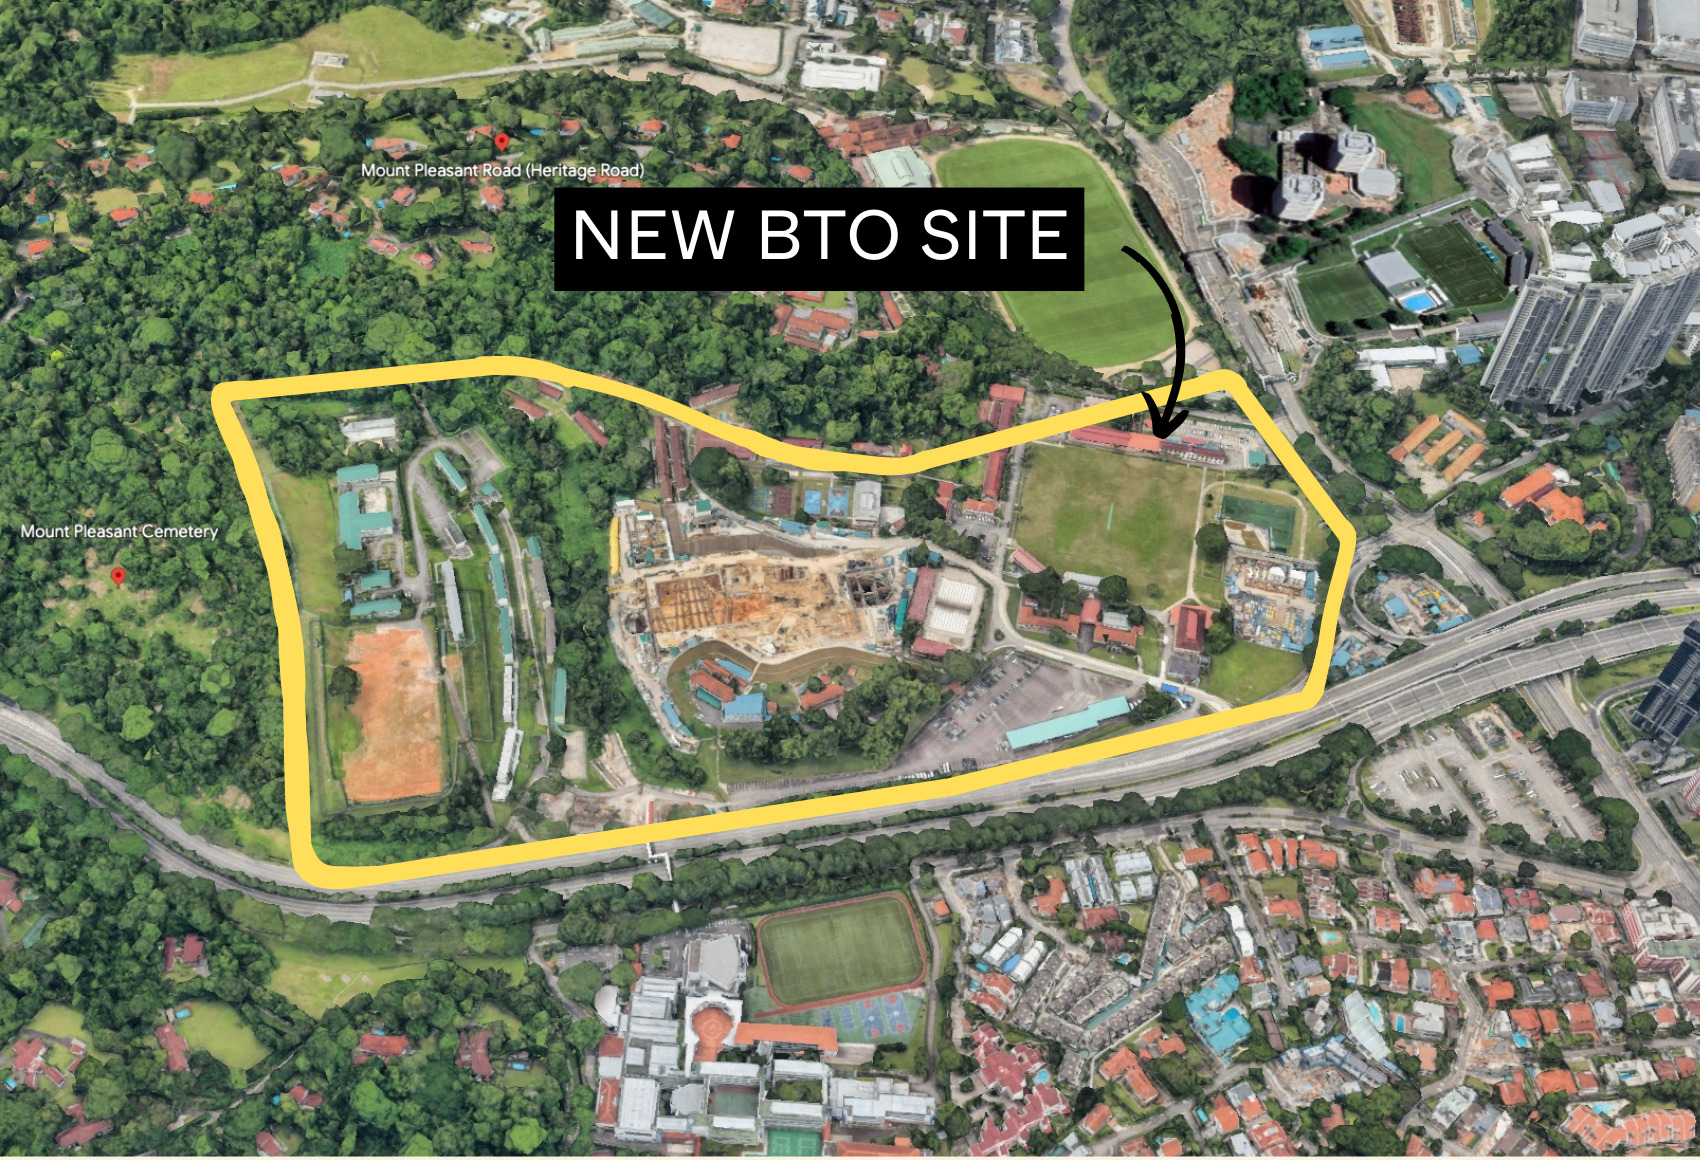 5,000 New HDB Flats At Mount Pleasant: Should You Wait For This Heritage Site Transformation?